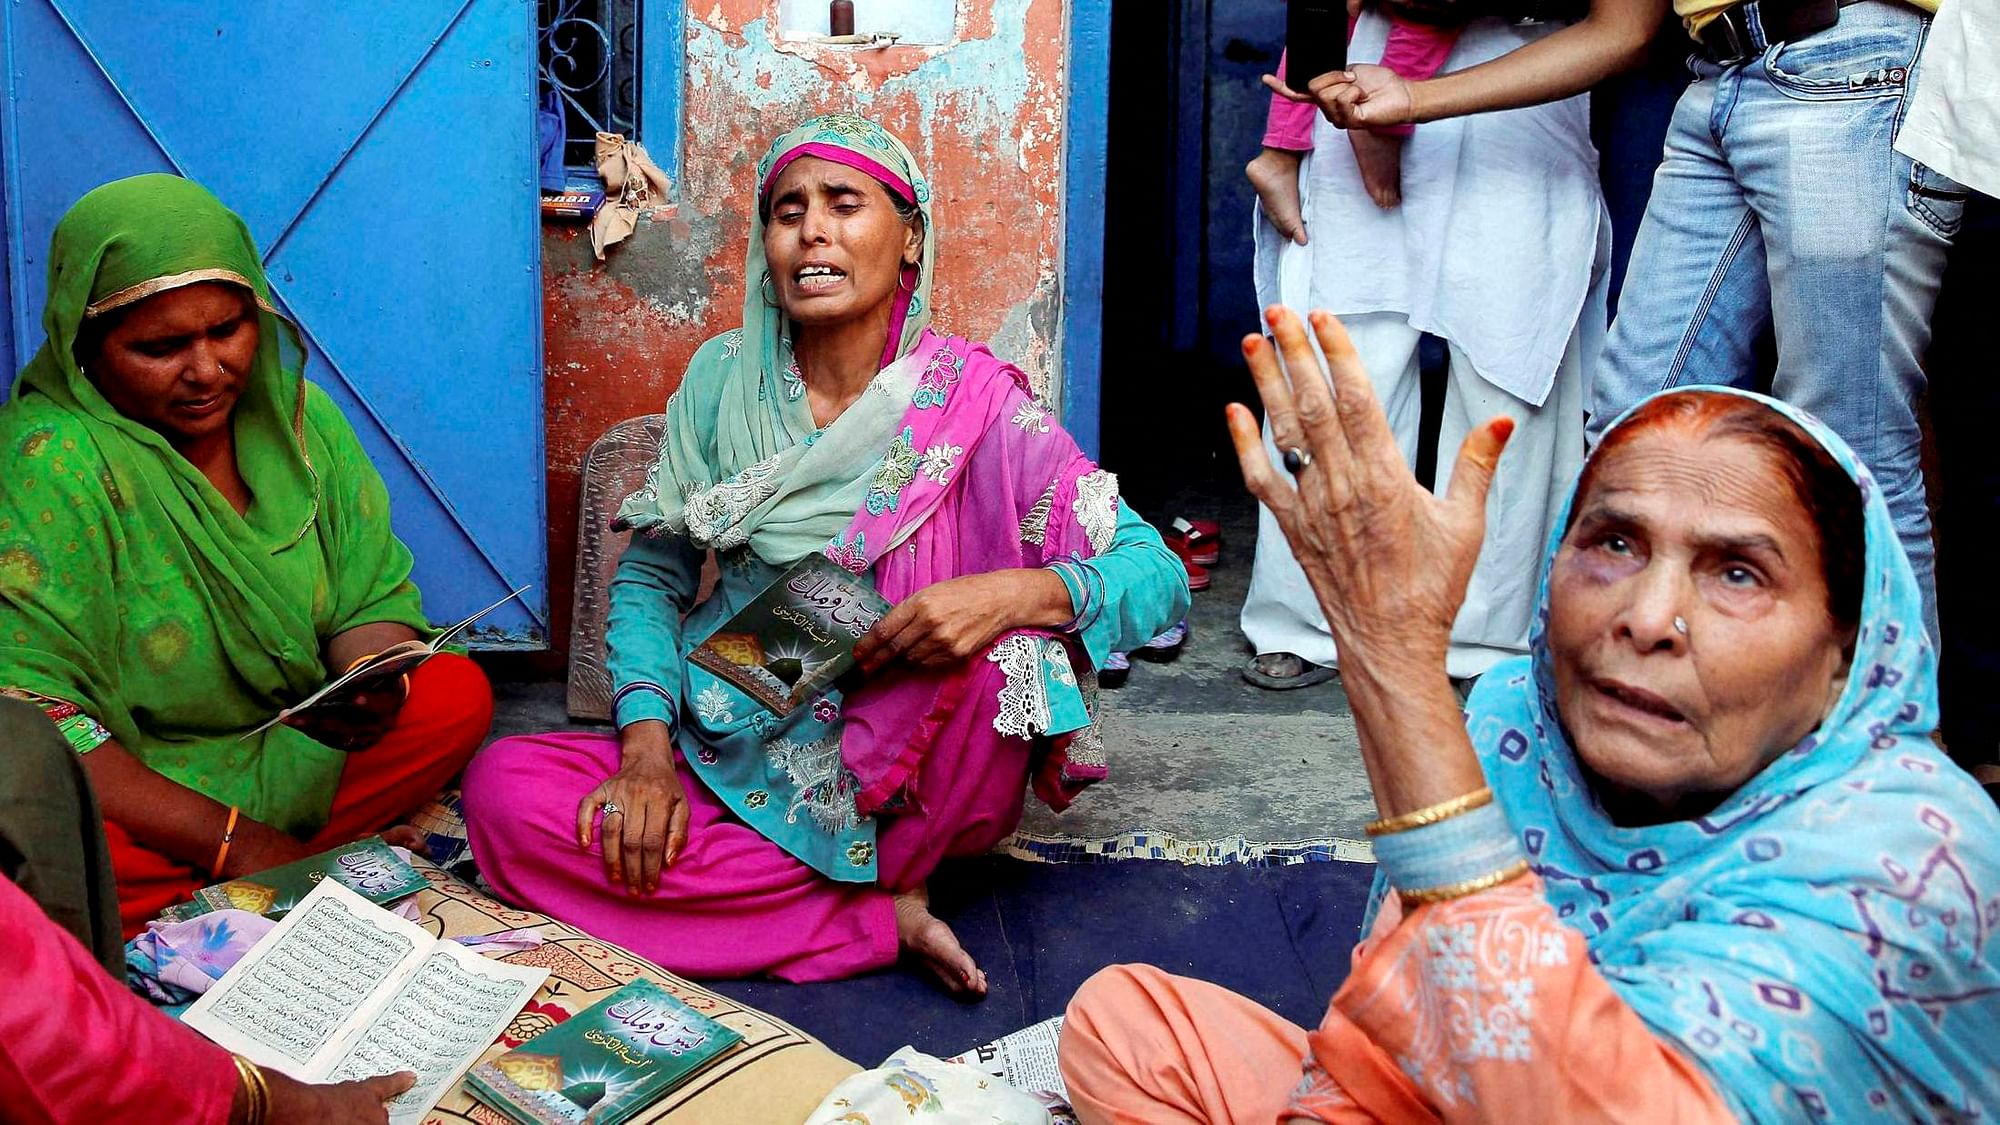 Relatives mourn the death of farmer Mohammad Akhlaq at his home in Bisara village about 45 kilometers from New Delhi. (Photo: PTI)